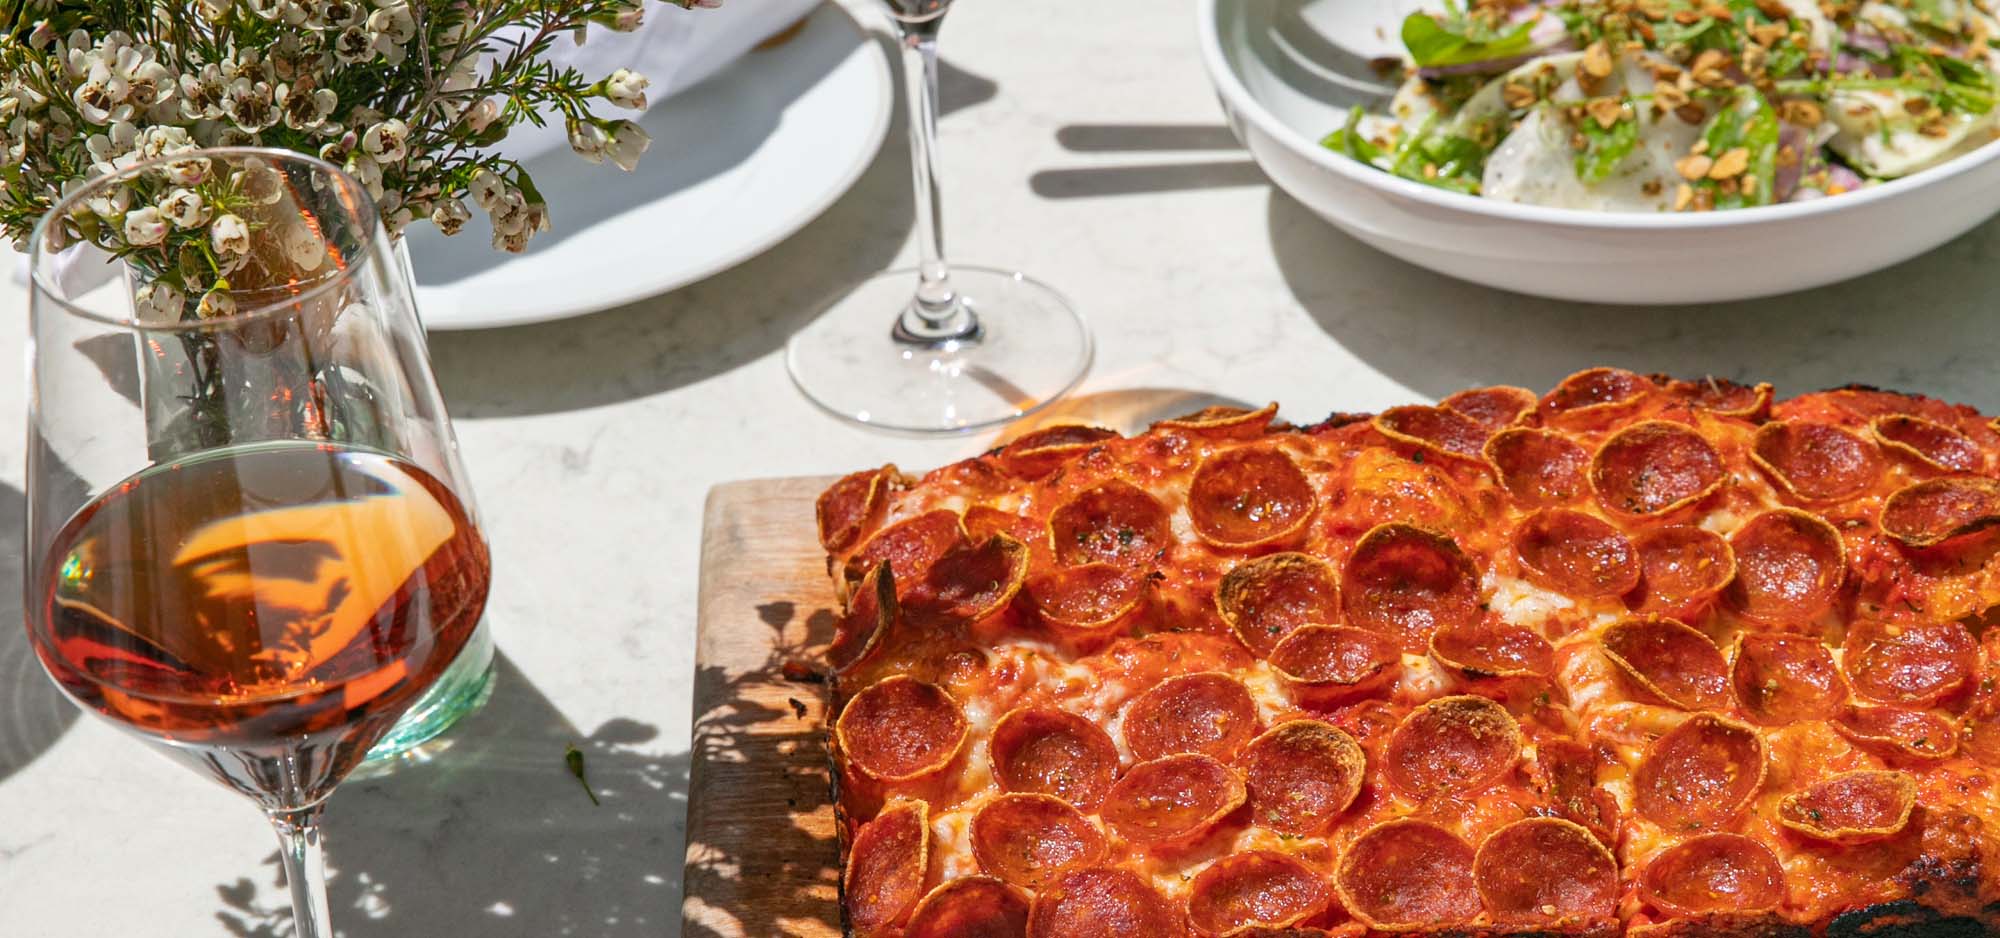 High end table setting with cutting board serving a deep dish pizza and bowl with Cesar salad.